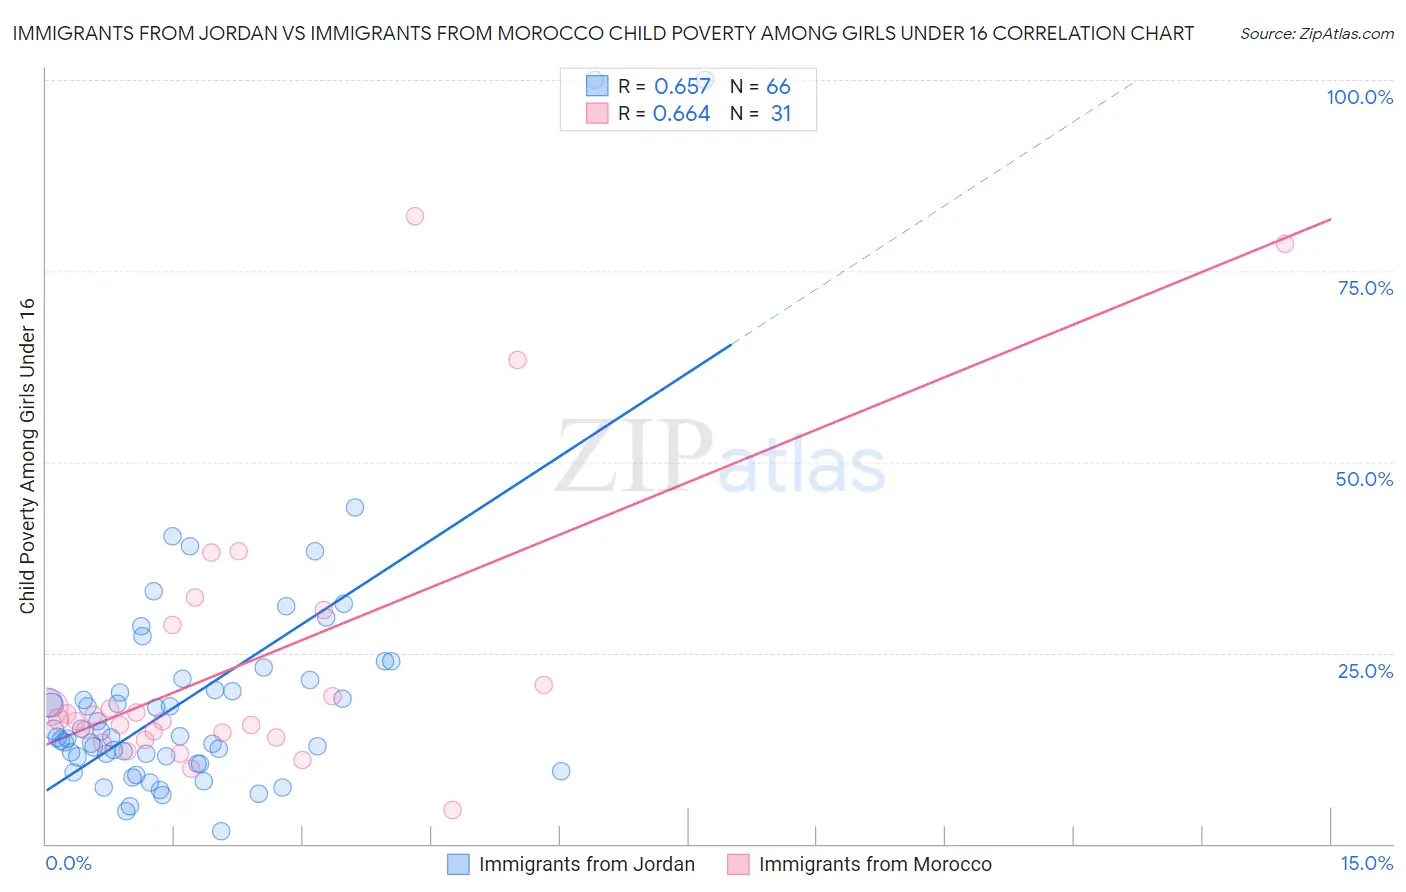 Immigrants from Jordan vs Immigrants from Morocco Child Poverty Among Girls Under 16